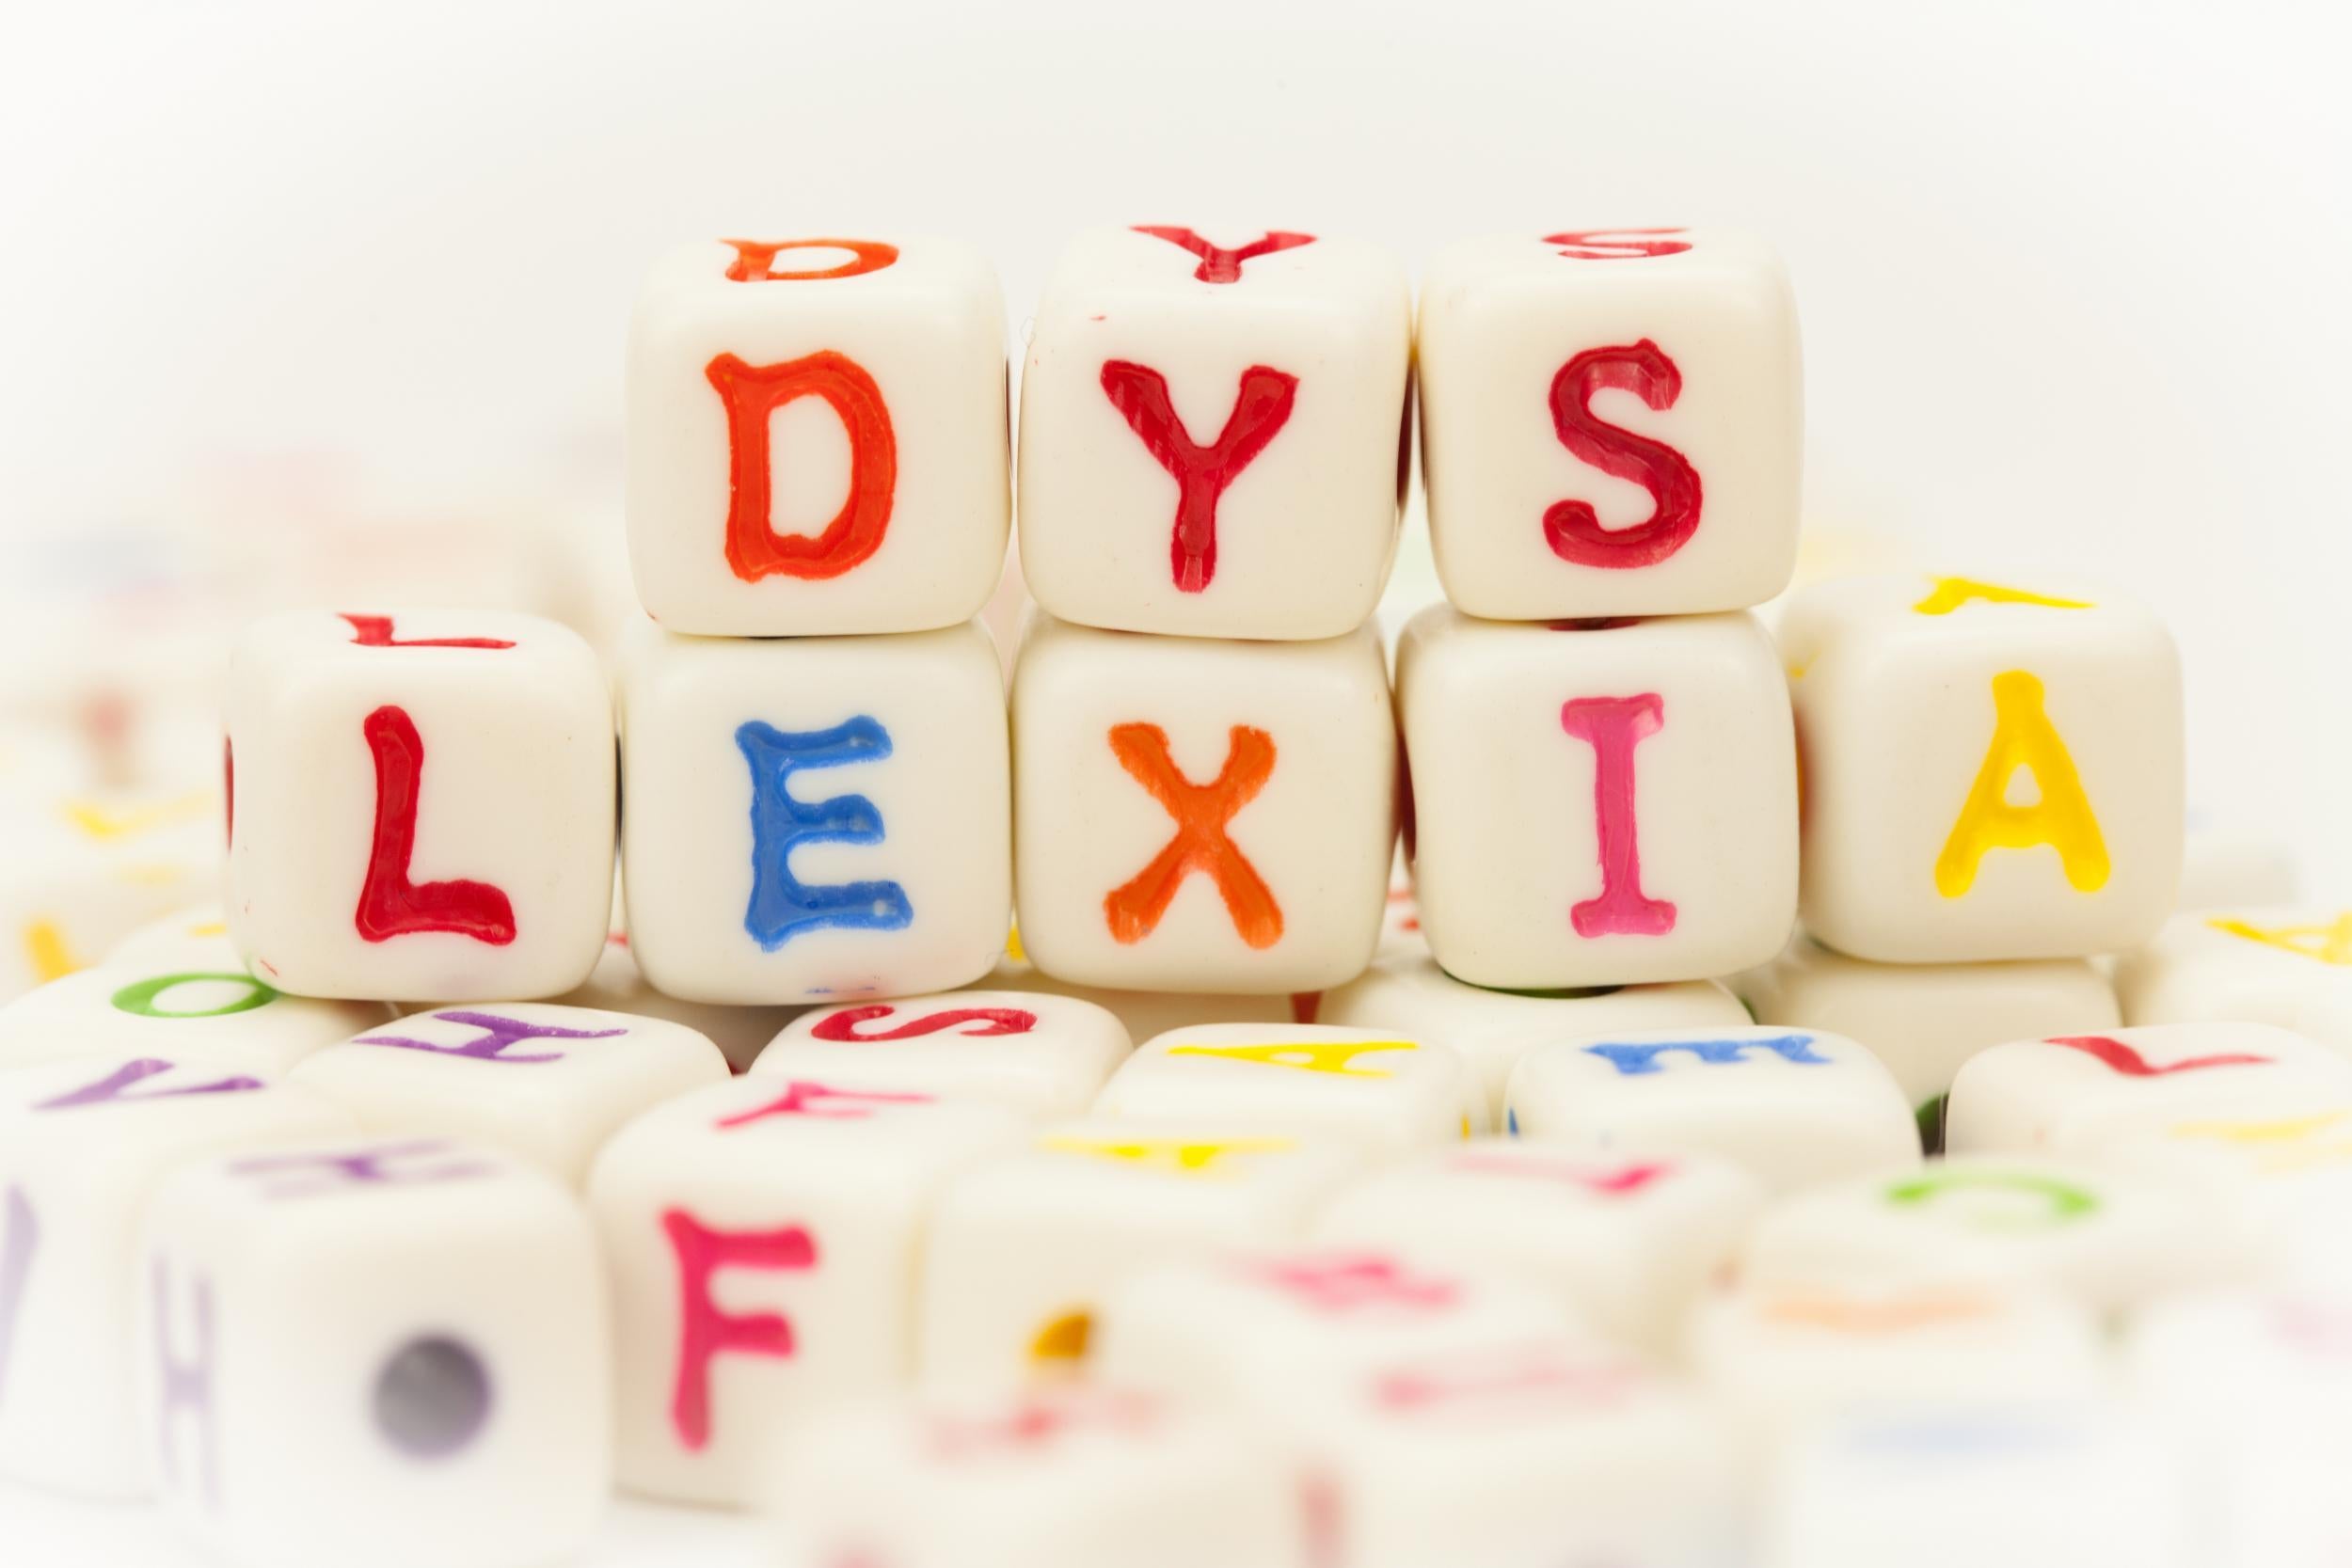 Dyslexia makes words and letters appear jumbled